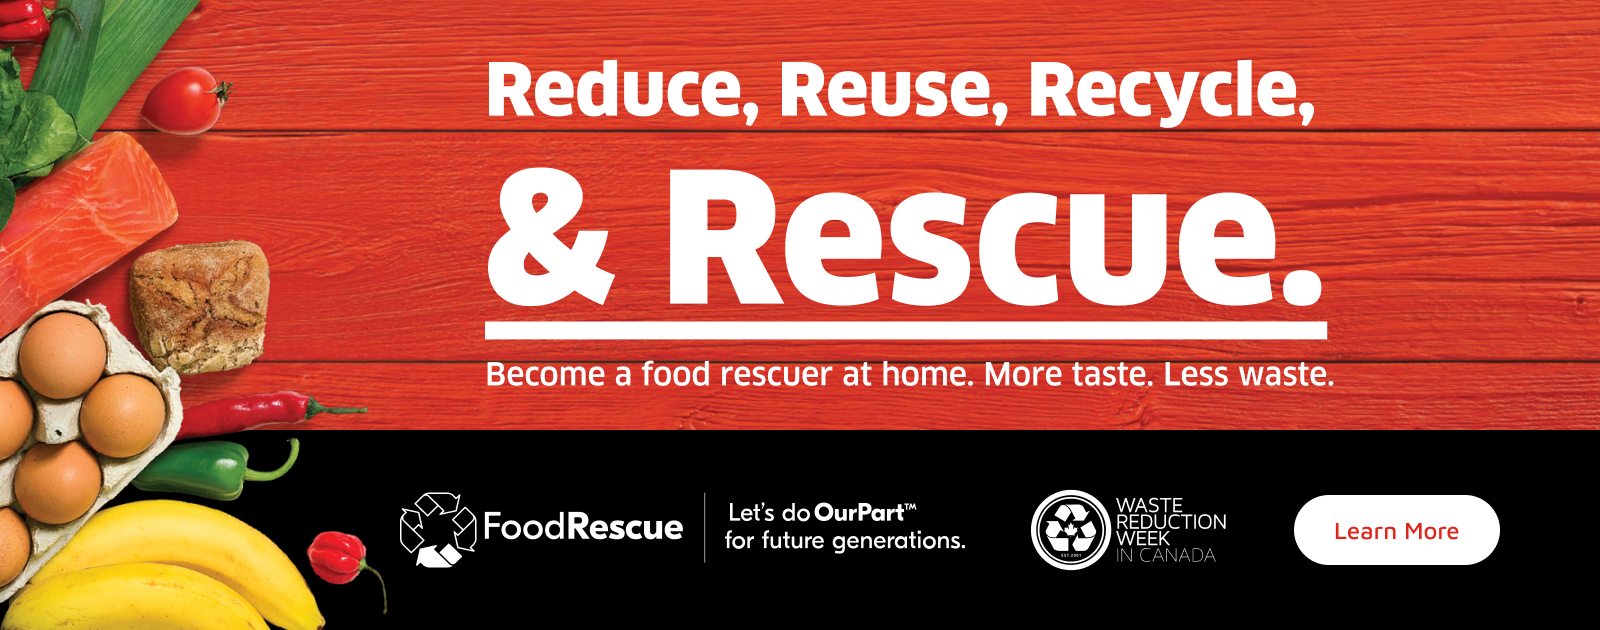 Text Reading 'Reduce, Reuse, Recycle, & Rescue. Become a food rescuer at home. More taste, less waste. Let's do OurPartâ„¢ for future generations. 'Learn More' by clicking the button below.'